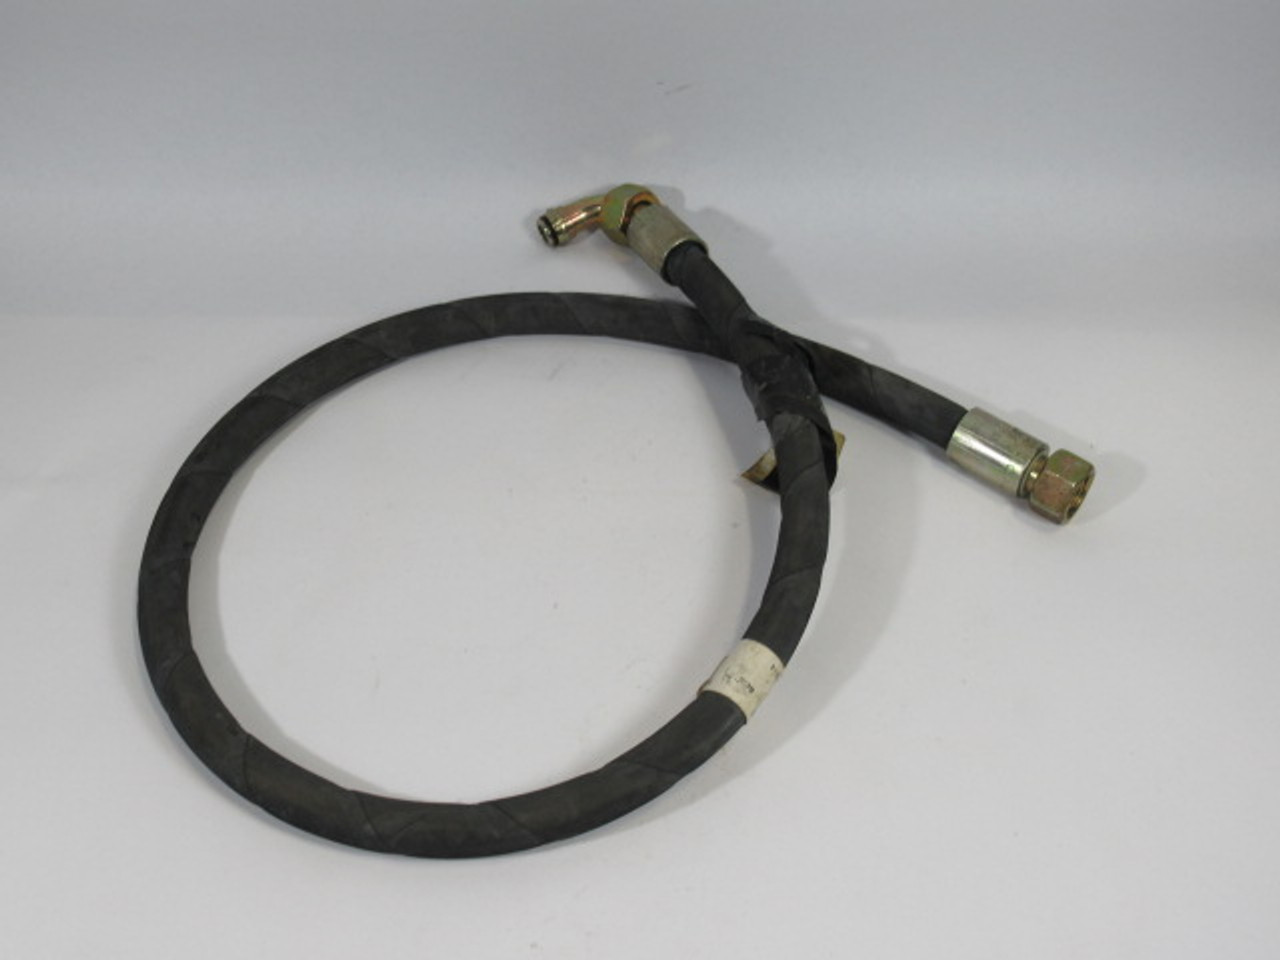 Volvo VOE-11025759 Cooling System Hose Assembly 1150mmL 3/8" USED